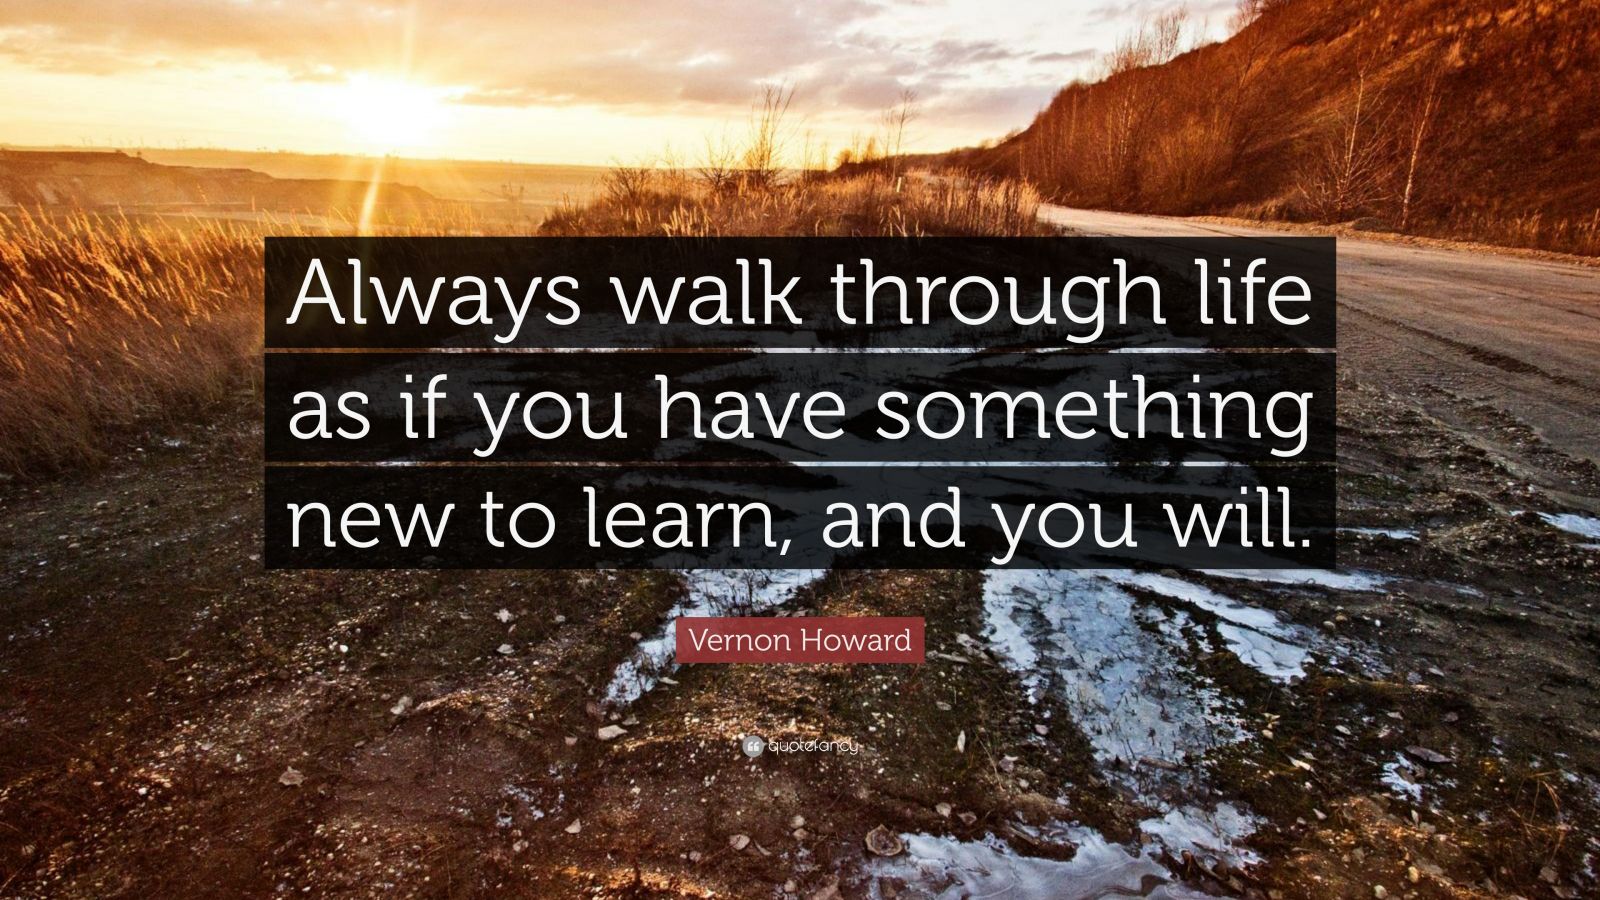 Vernon Howard Quote: “Always walk through life as if you have something ...